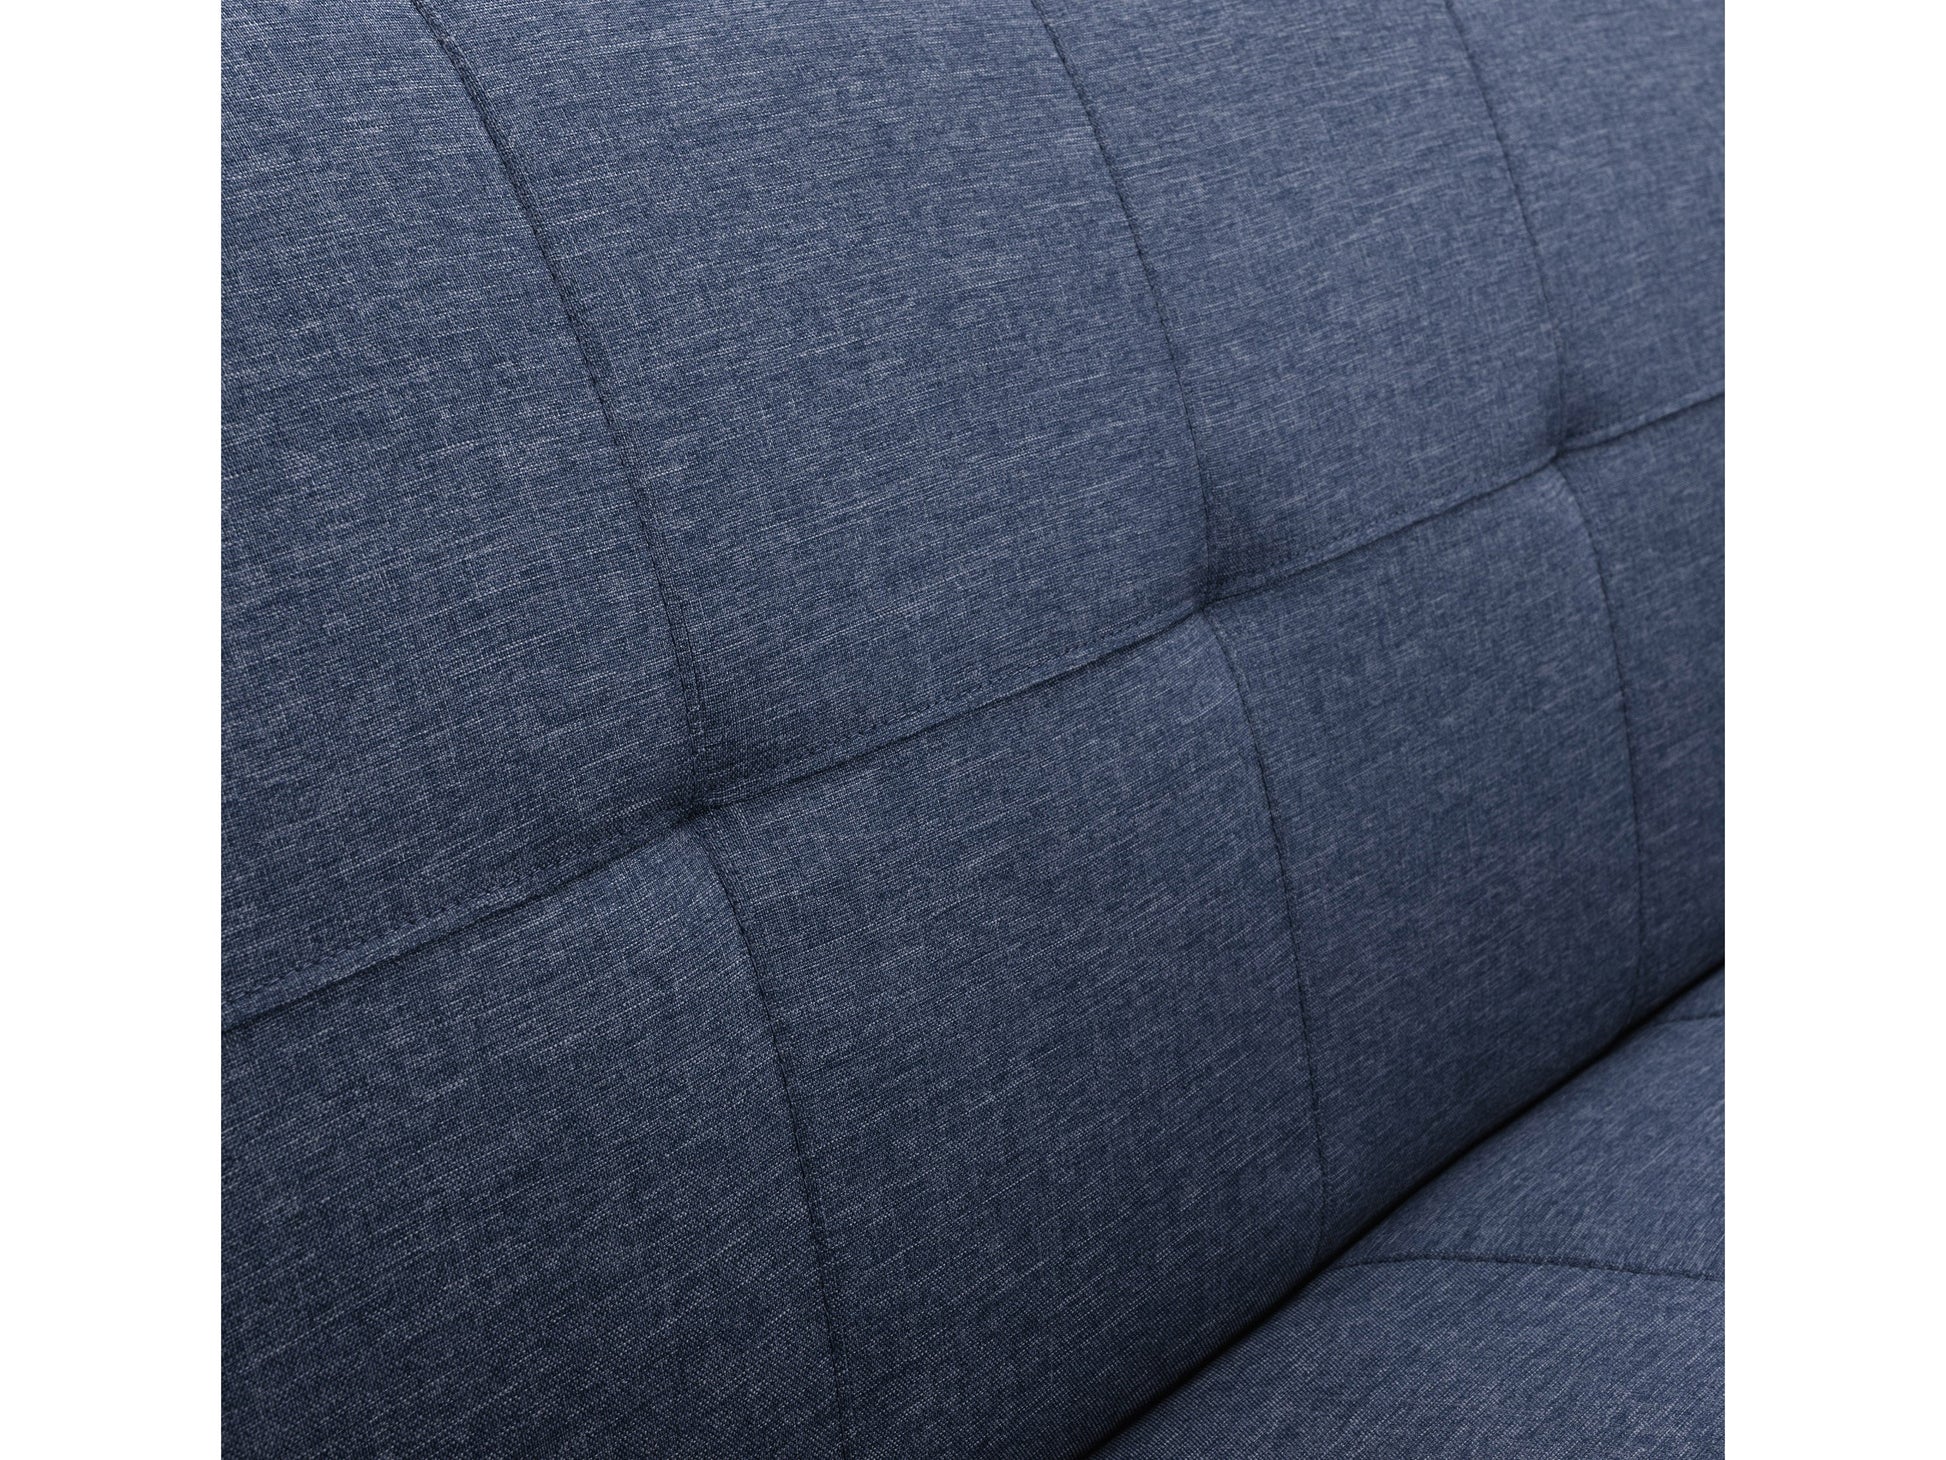 navy blue Convertible Futon Sofa Bed Yorkton collection detail image by CorLiving#color_navy-blue